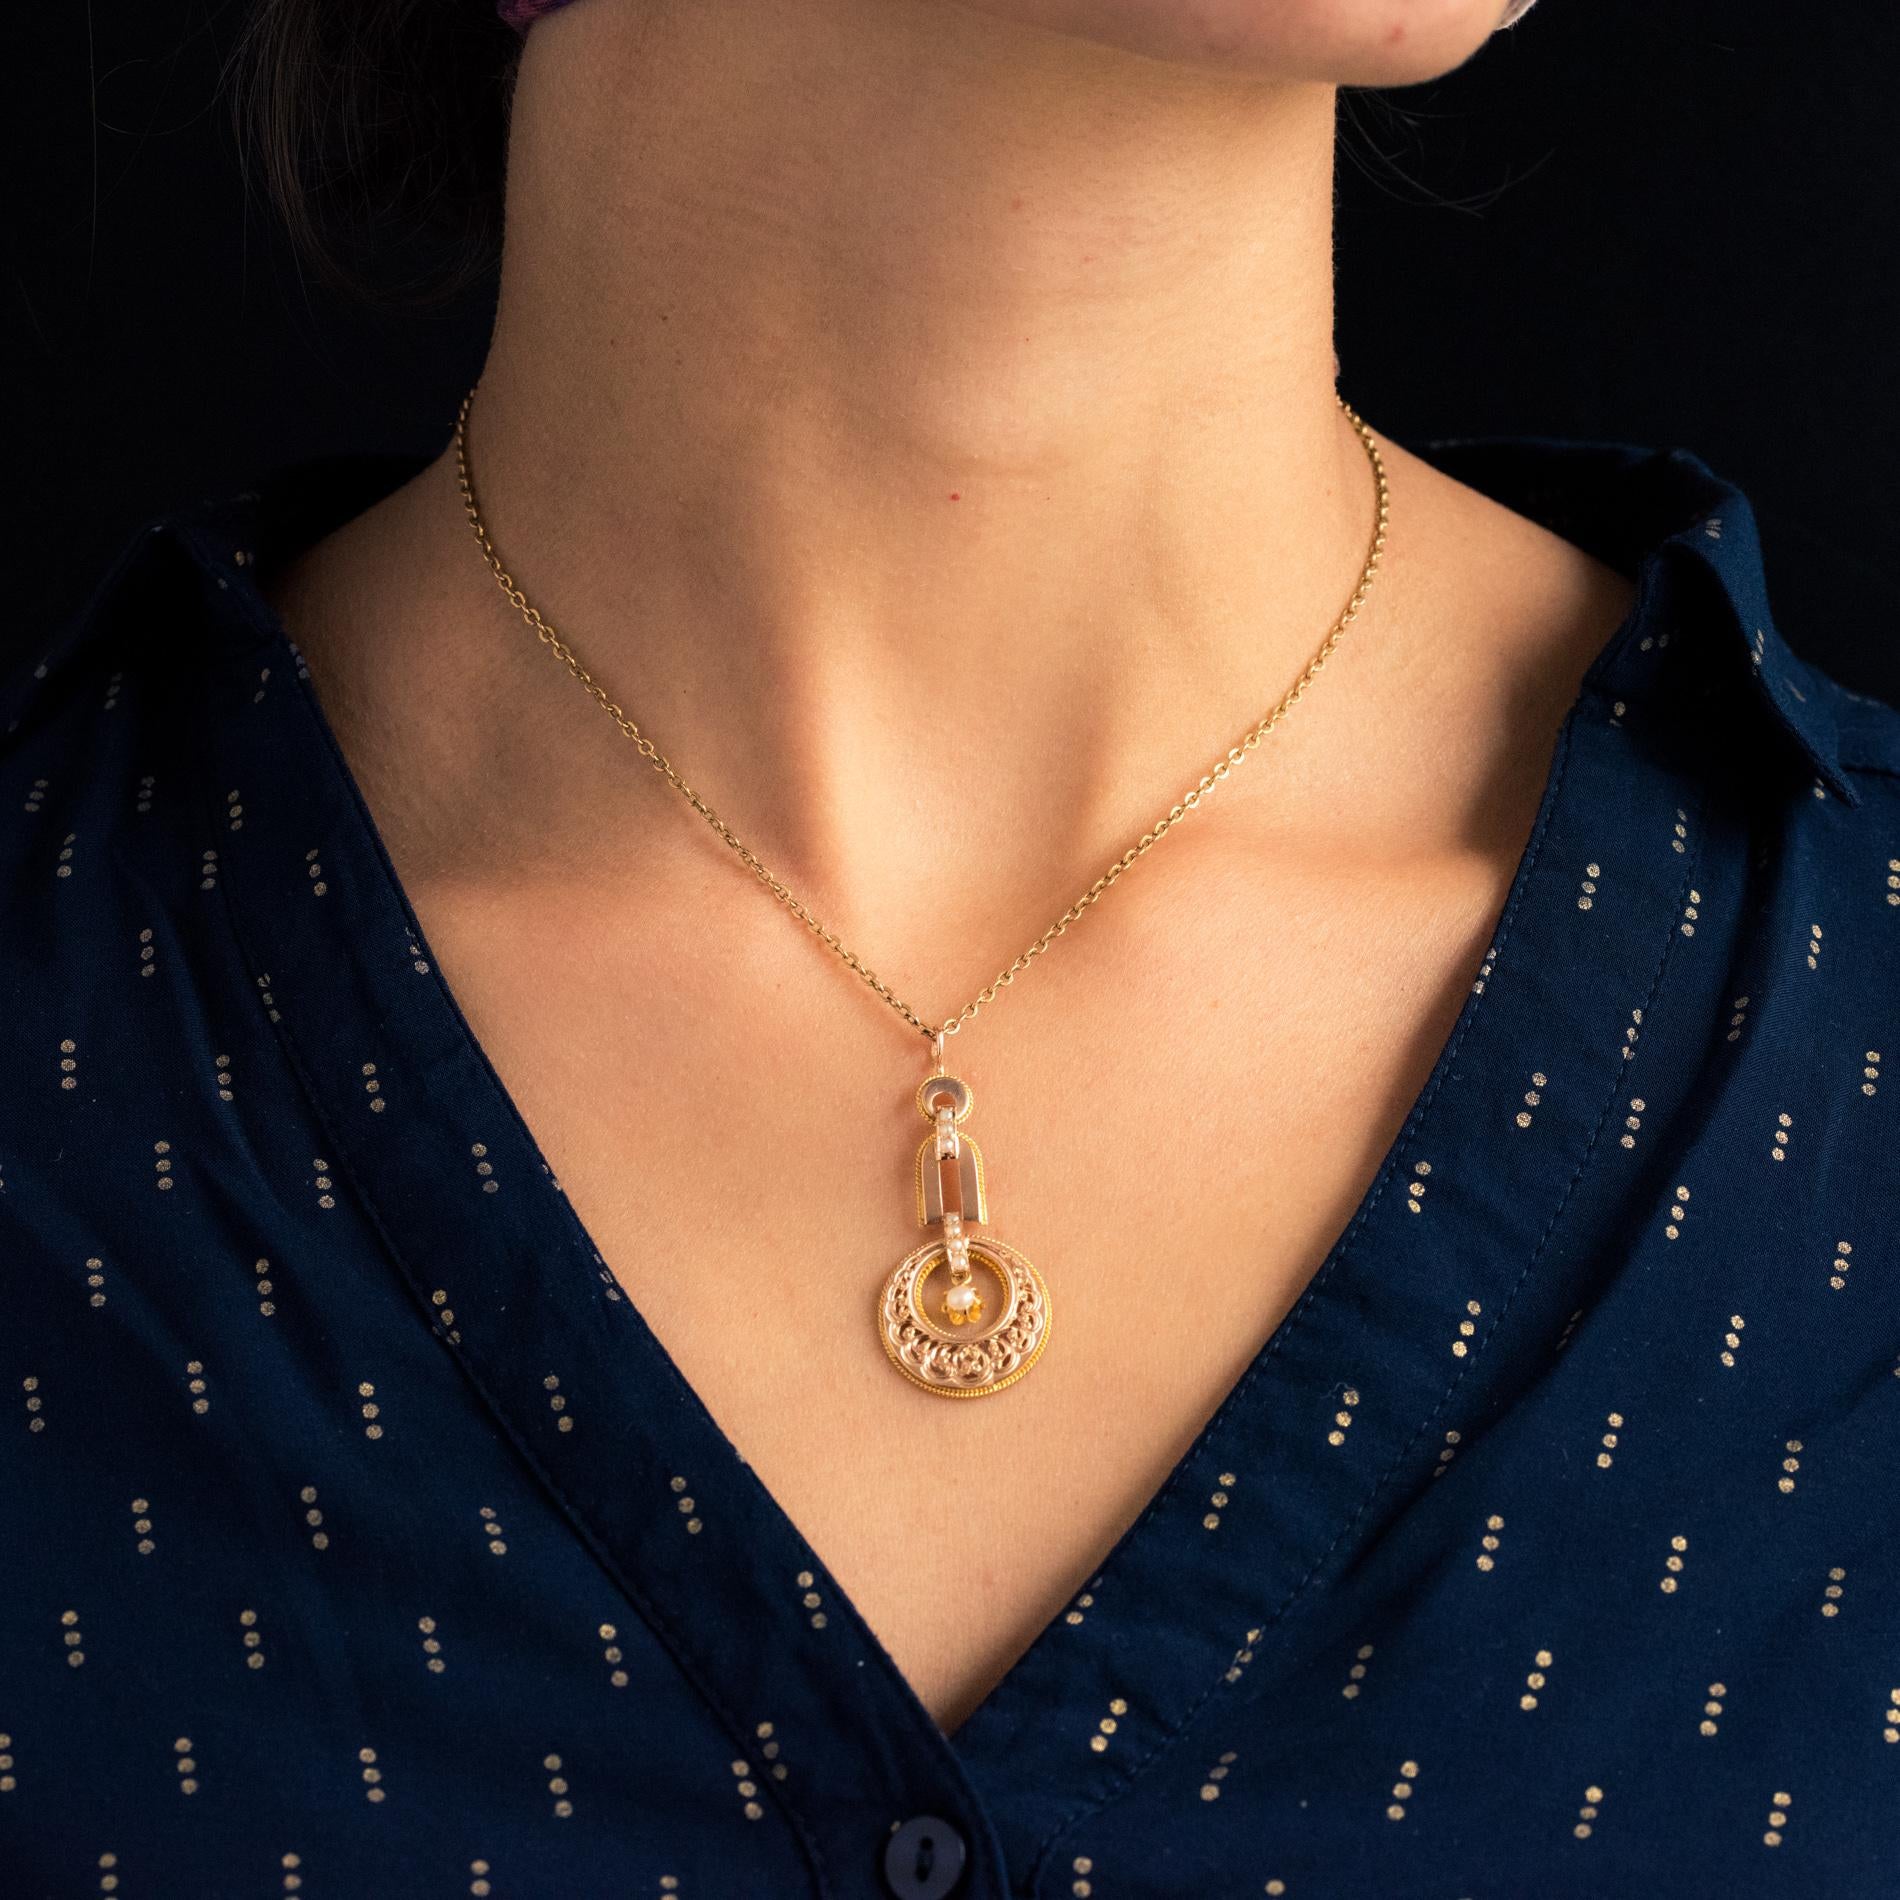 Pendant in 18 karat rose gold, eagle's head hallmark.
This antique pendant represents a horseshoe pattern held by three natural pearls, itself supporting an openwork pattern at its base with, in the center in a tassel, a natural half-pearl is